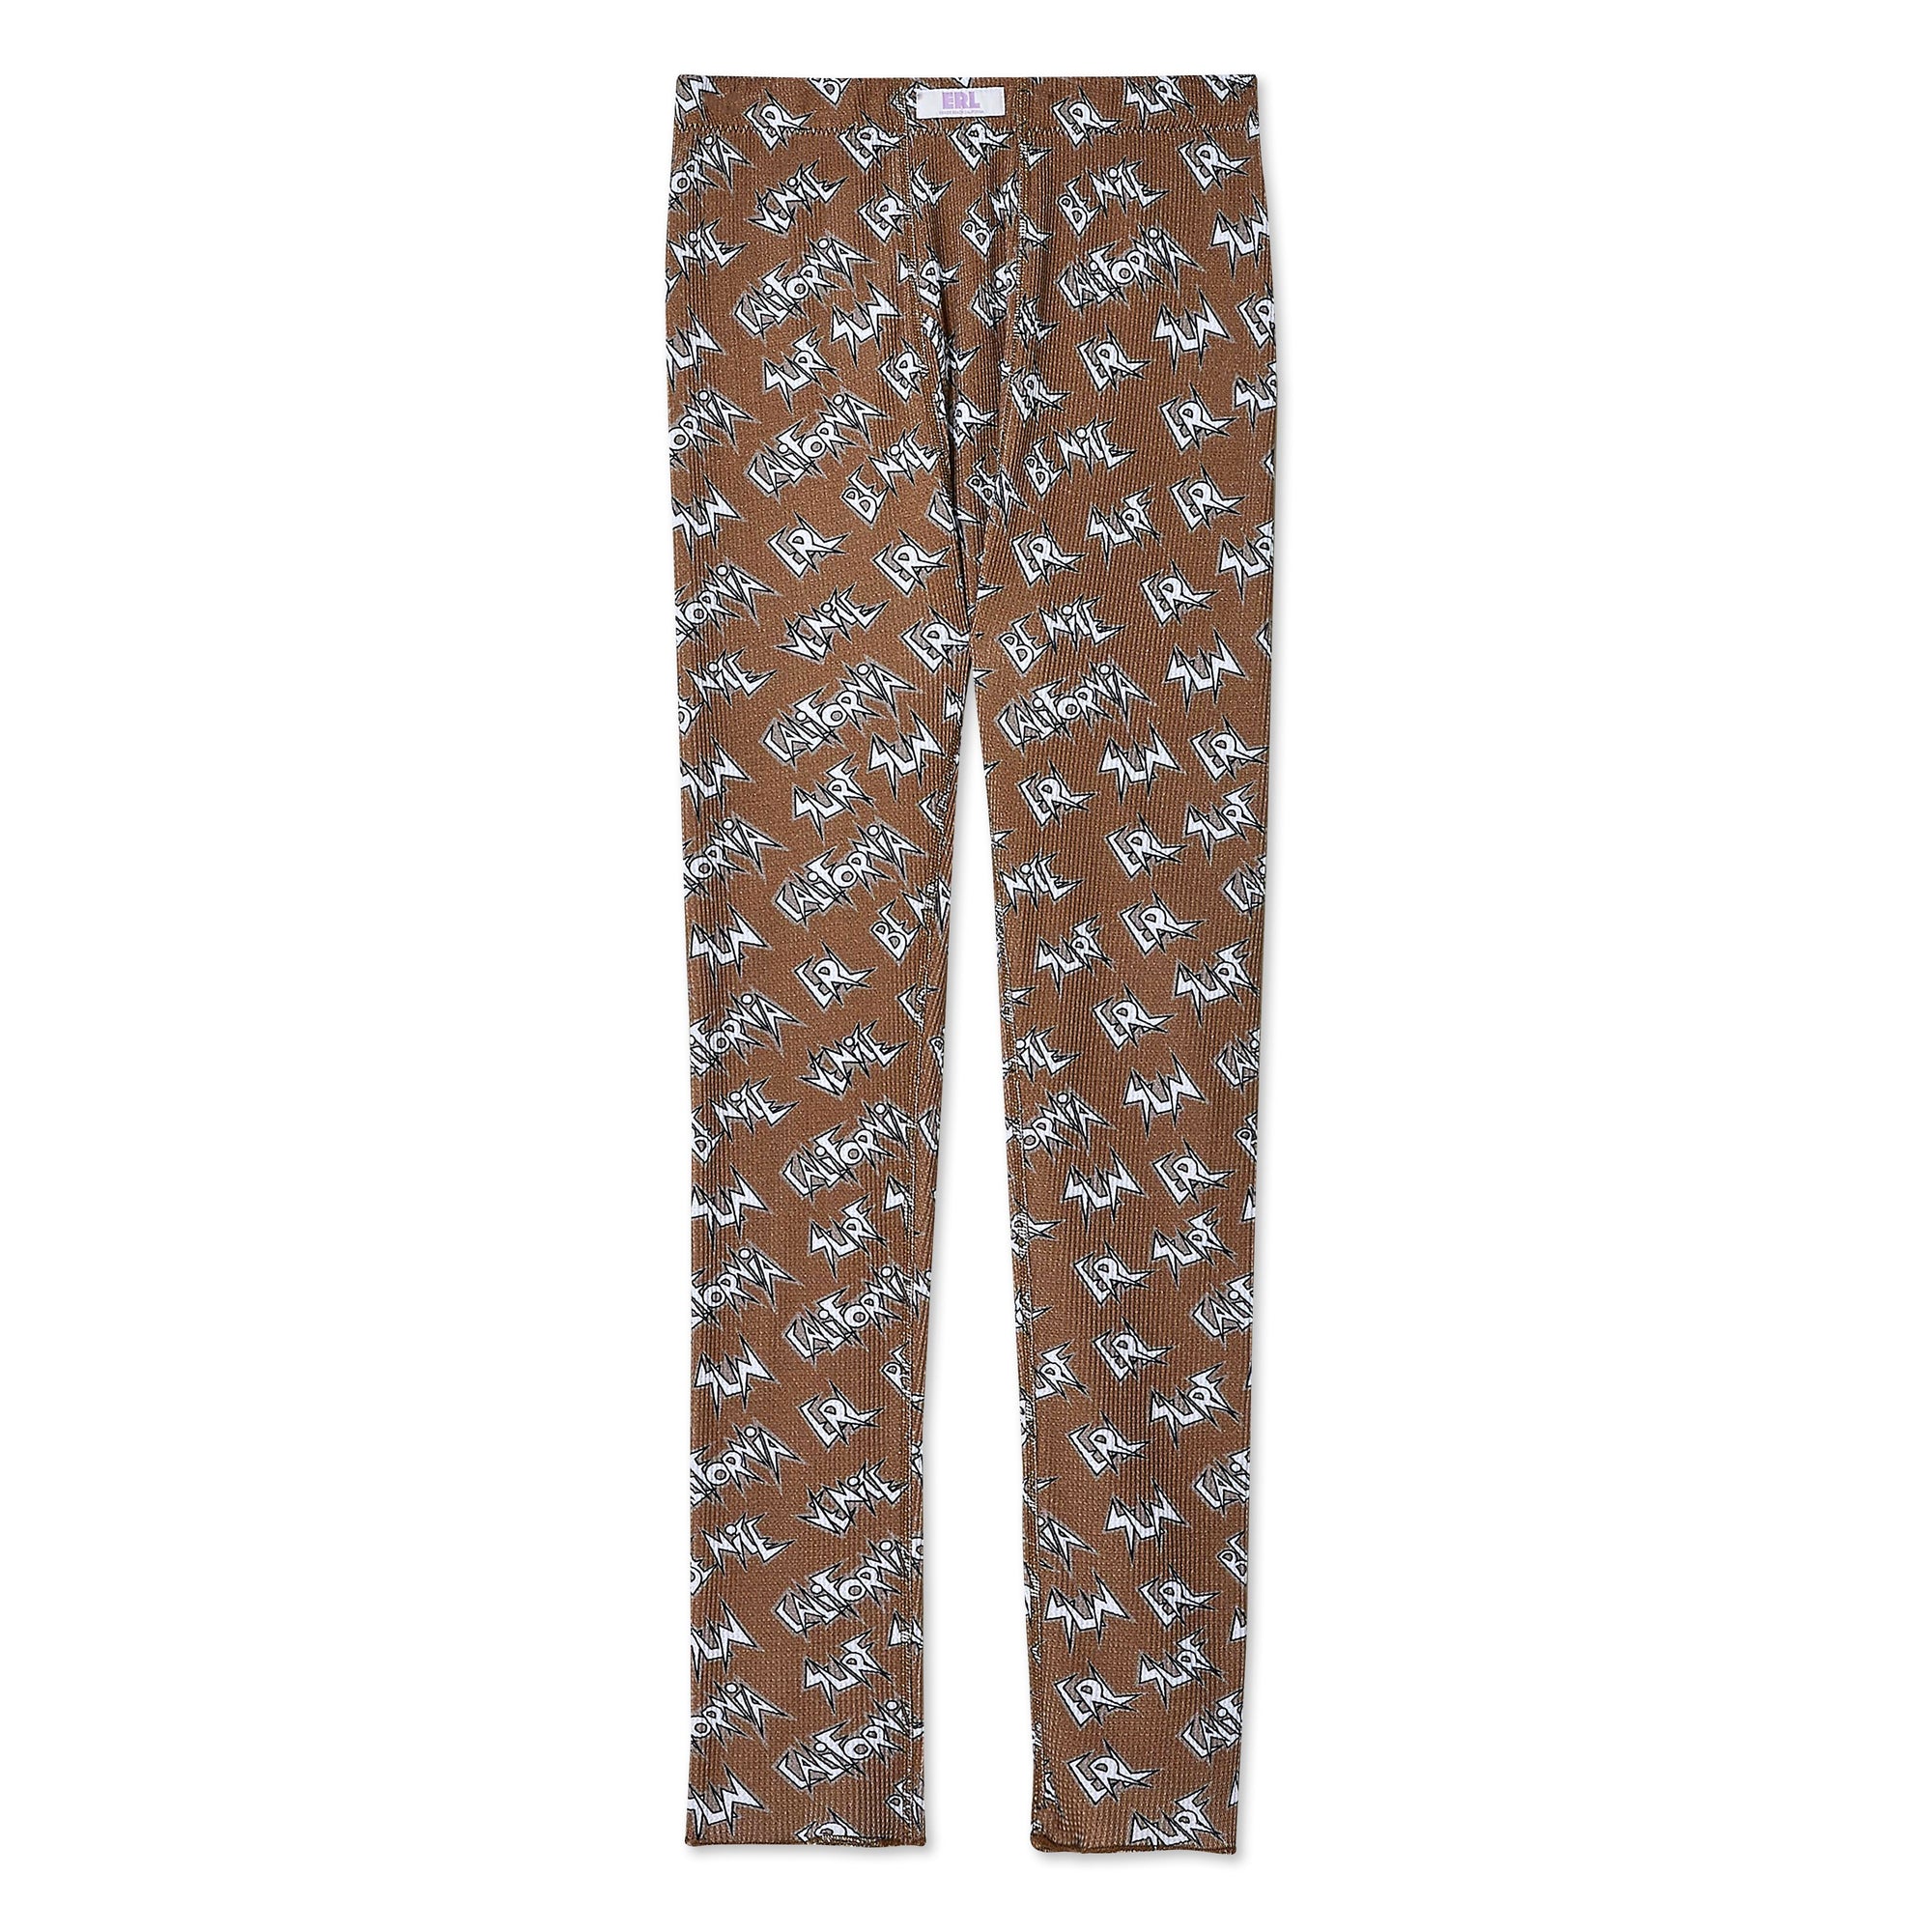 ERL - Men's Printed Waffle Long Johns - (Brown) view 1